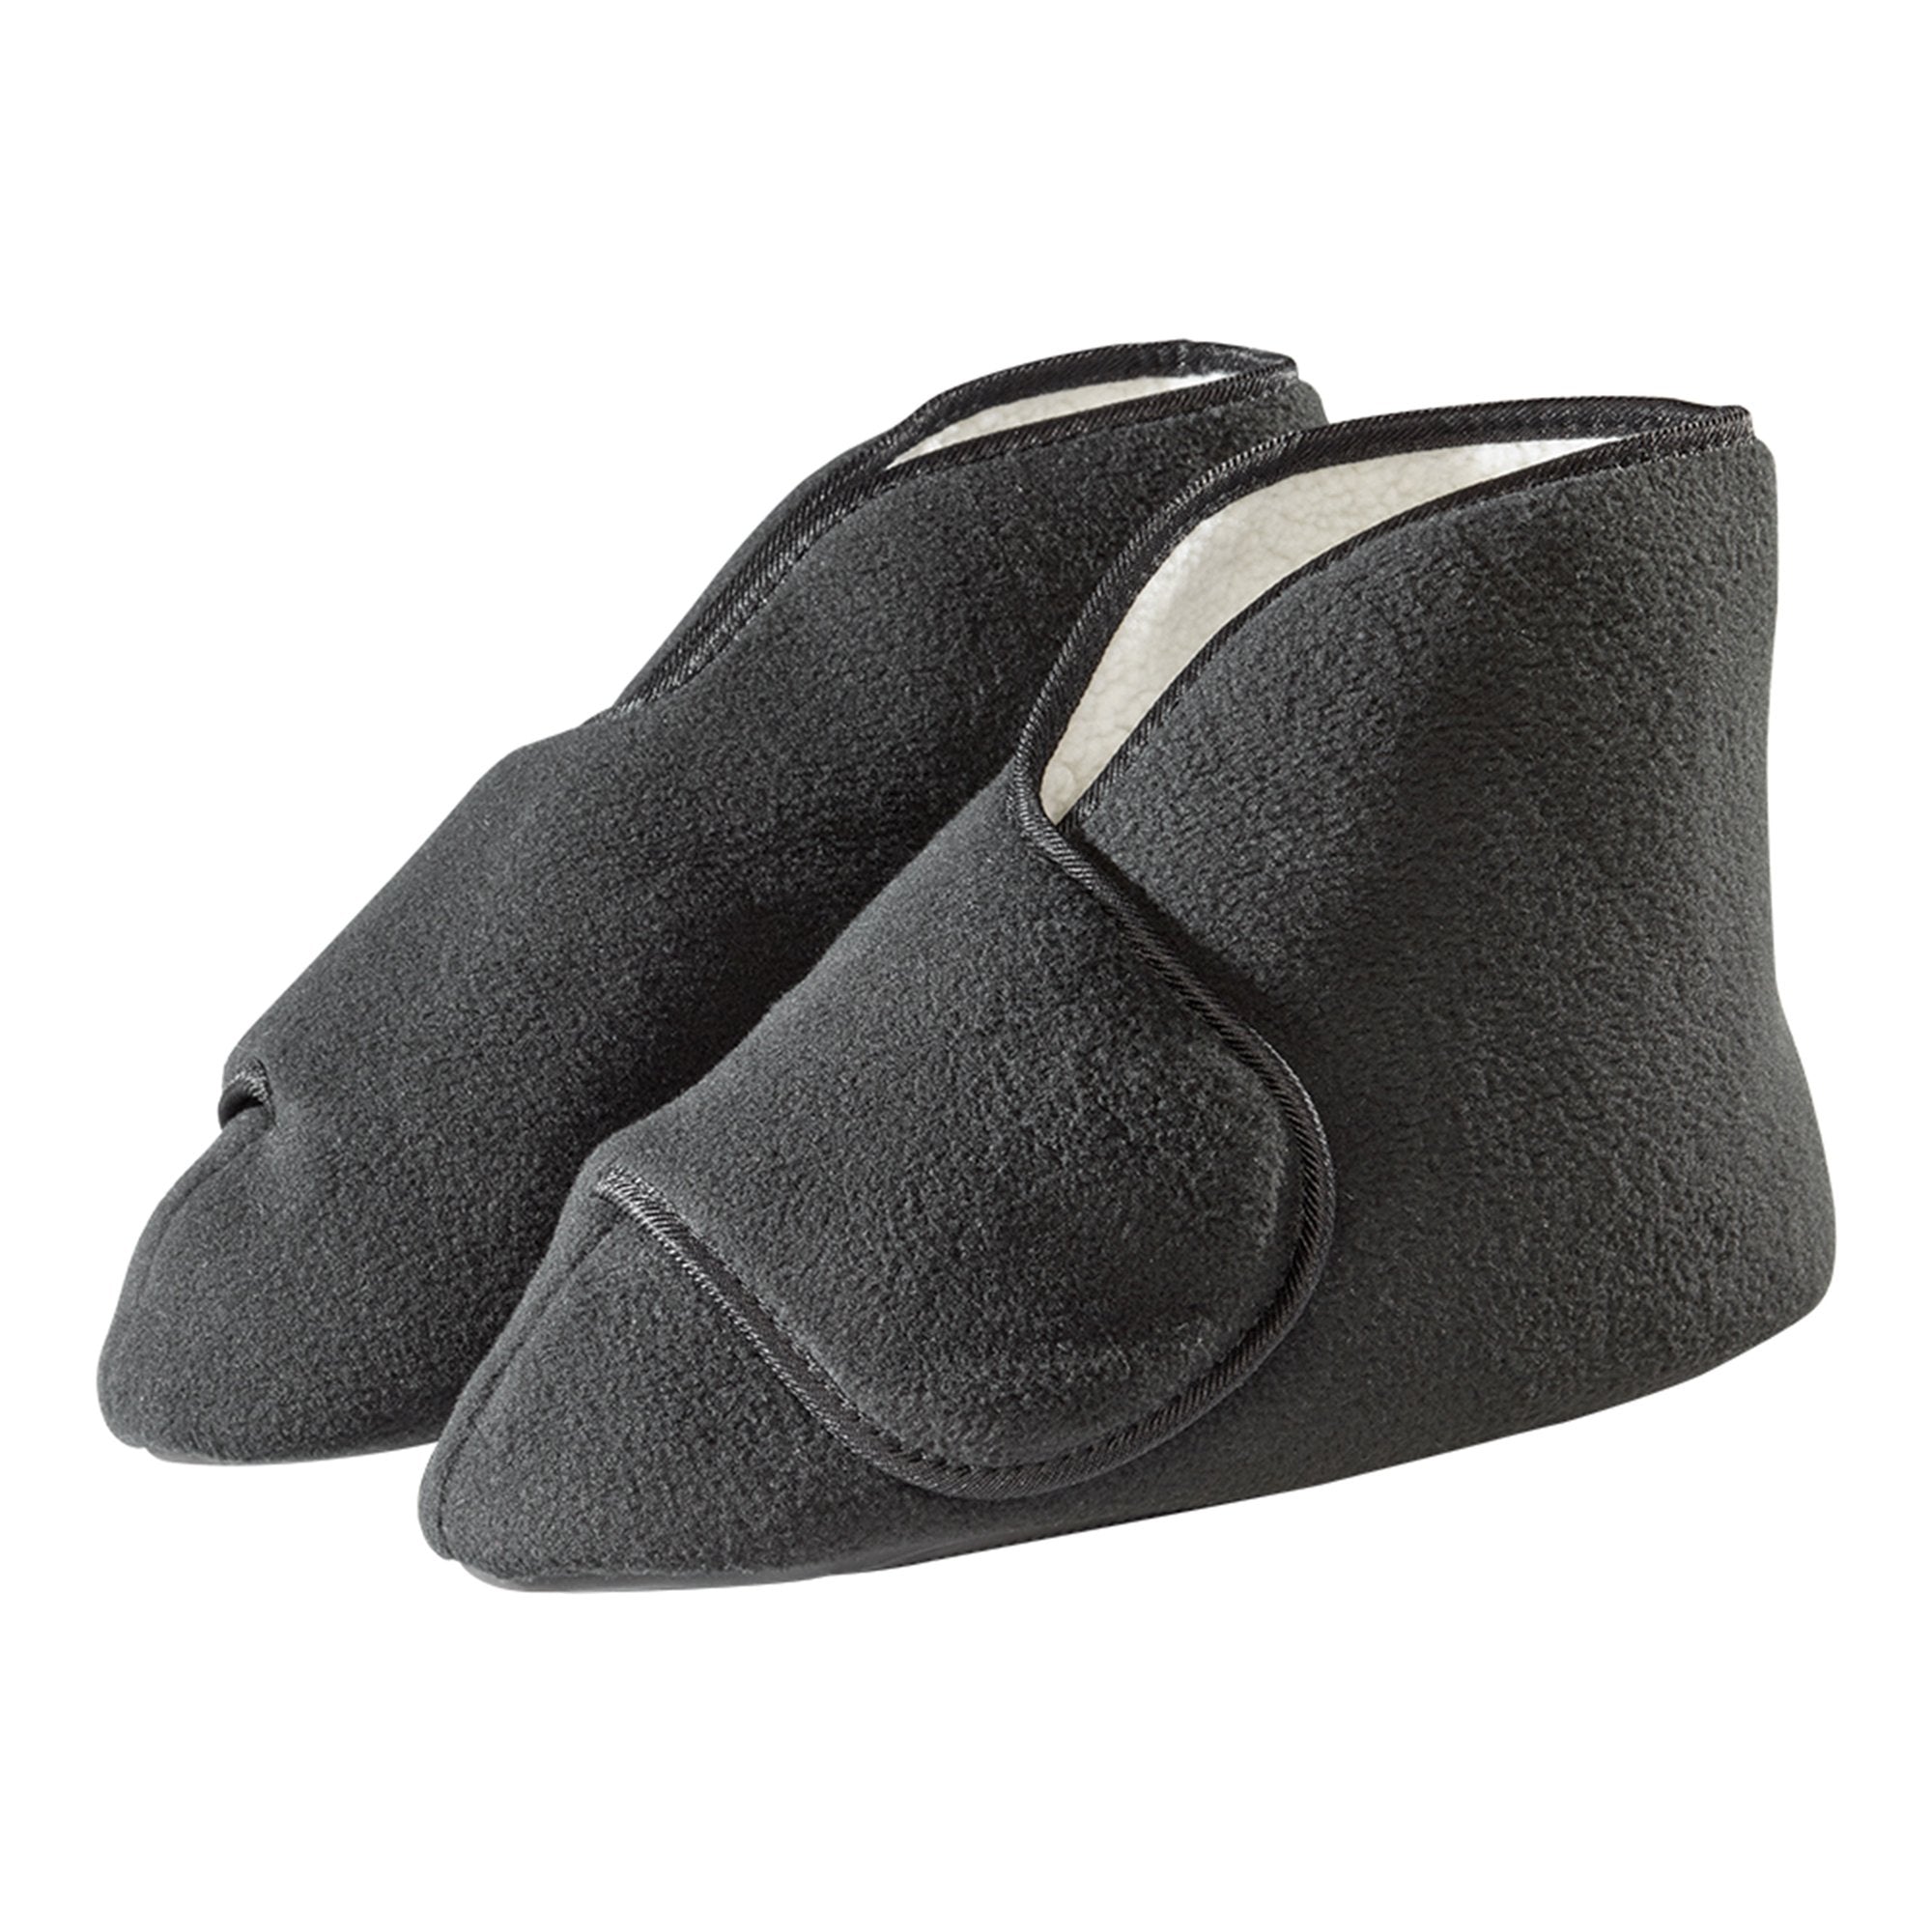 Diabetic Bootie Slippers Silverts X-Small / X-Wide Black Ankle High